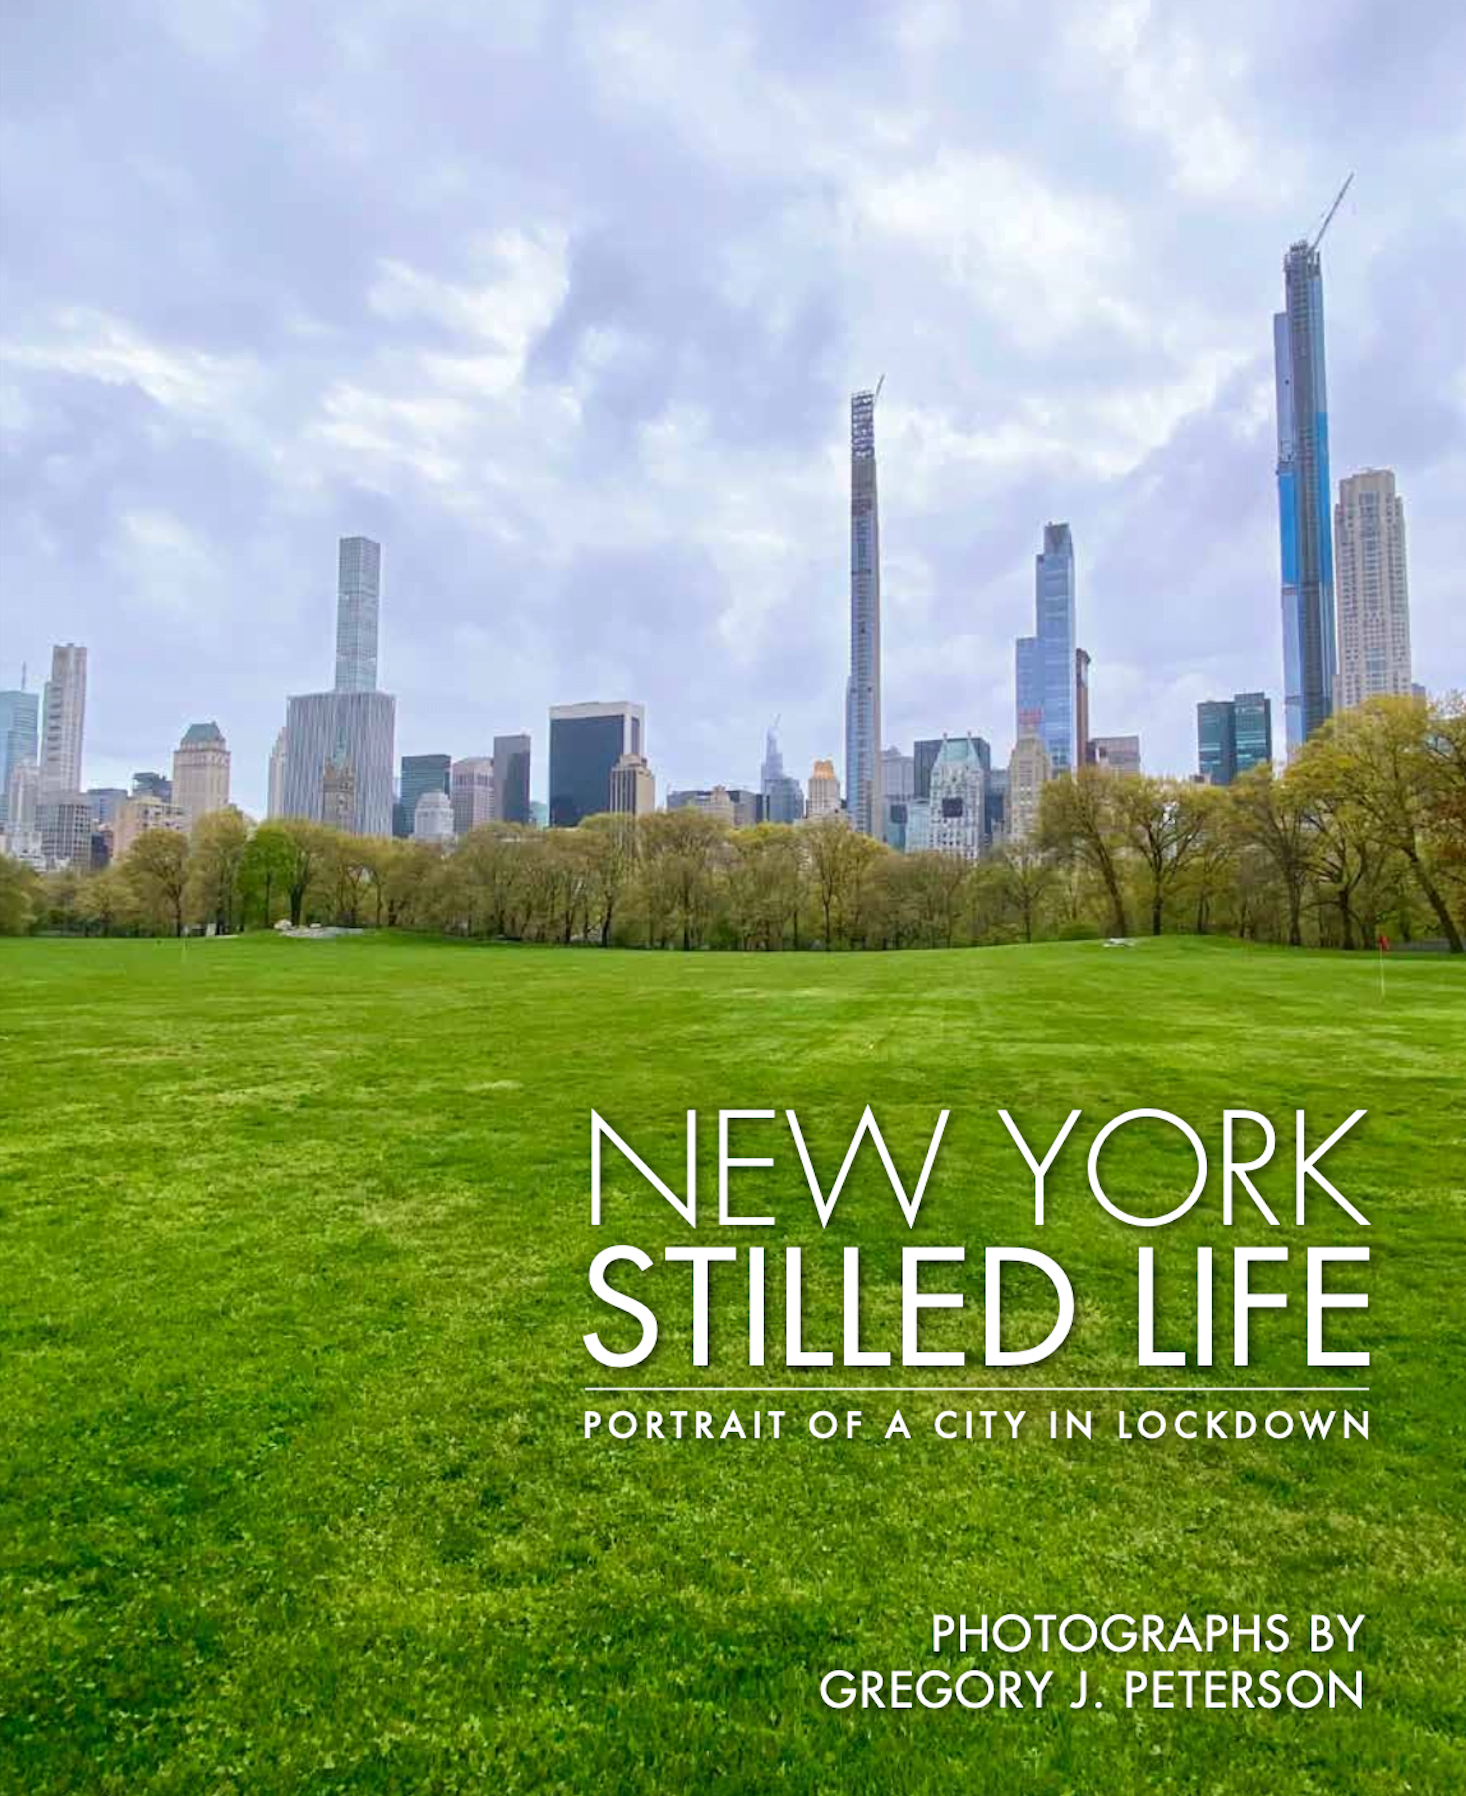 New York Stilled Life: Portrait of a City in Lockdown, Photographs by Gregory J. Peterson